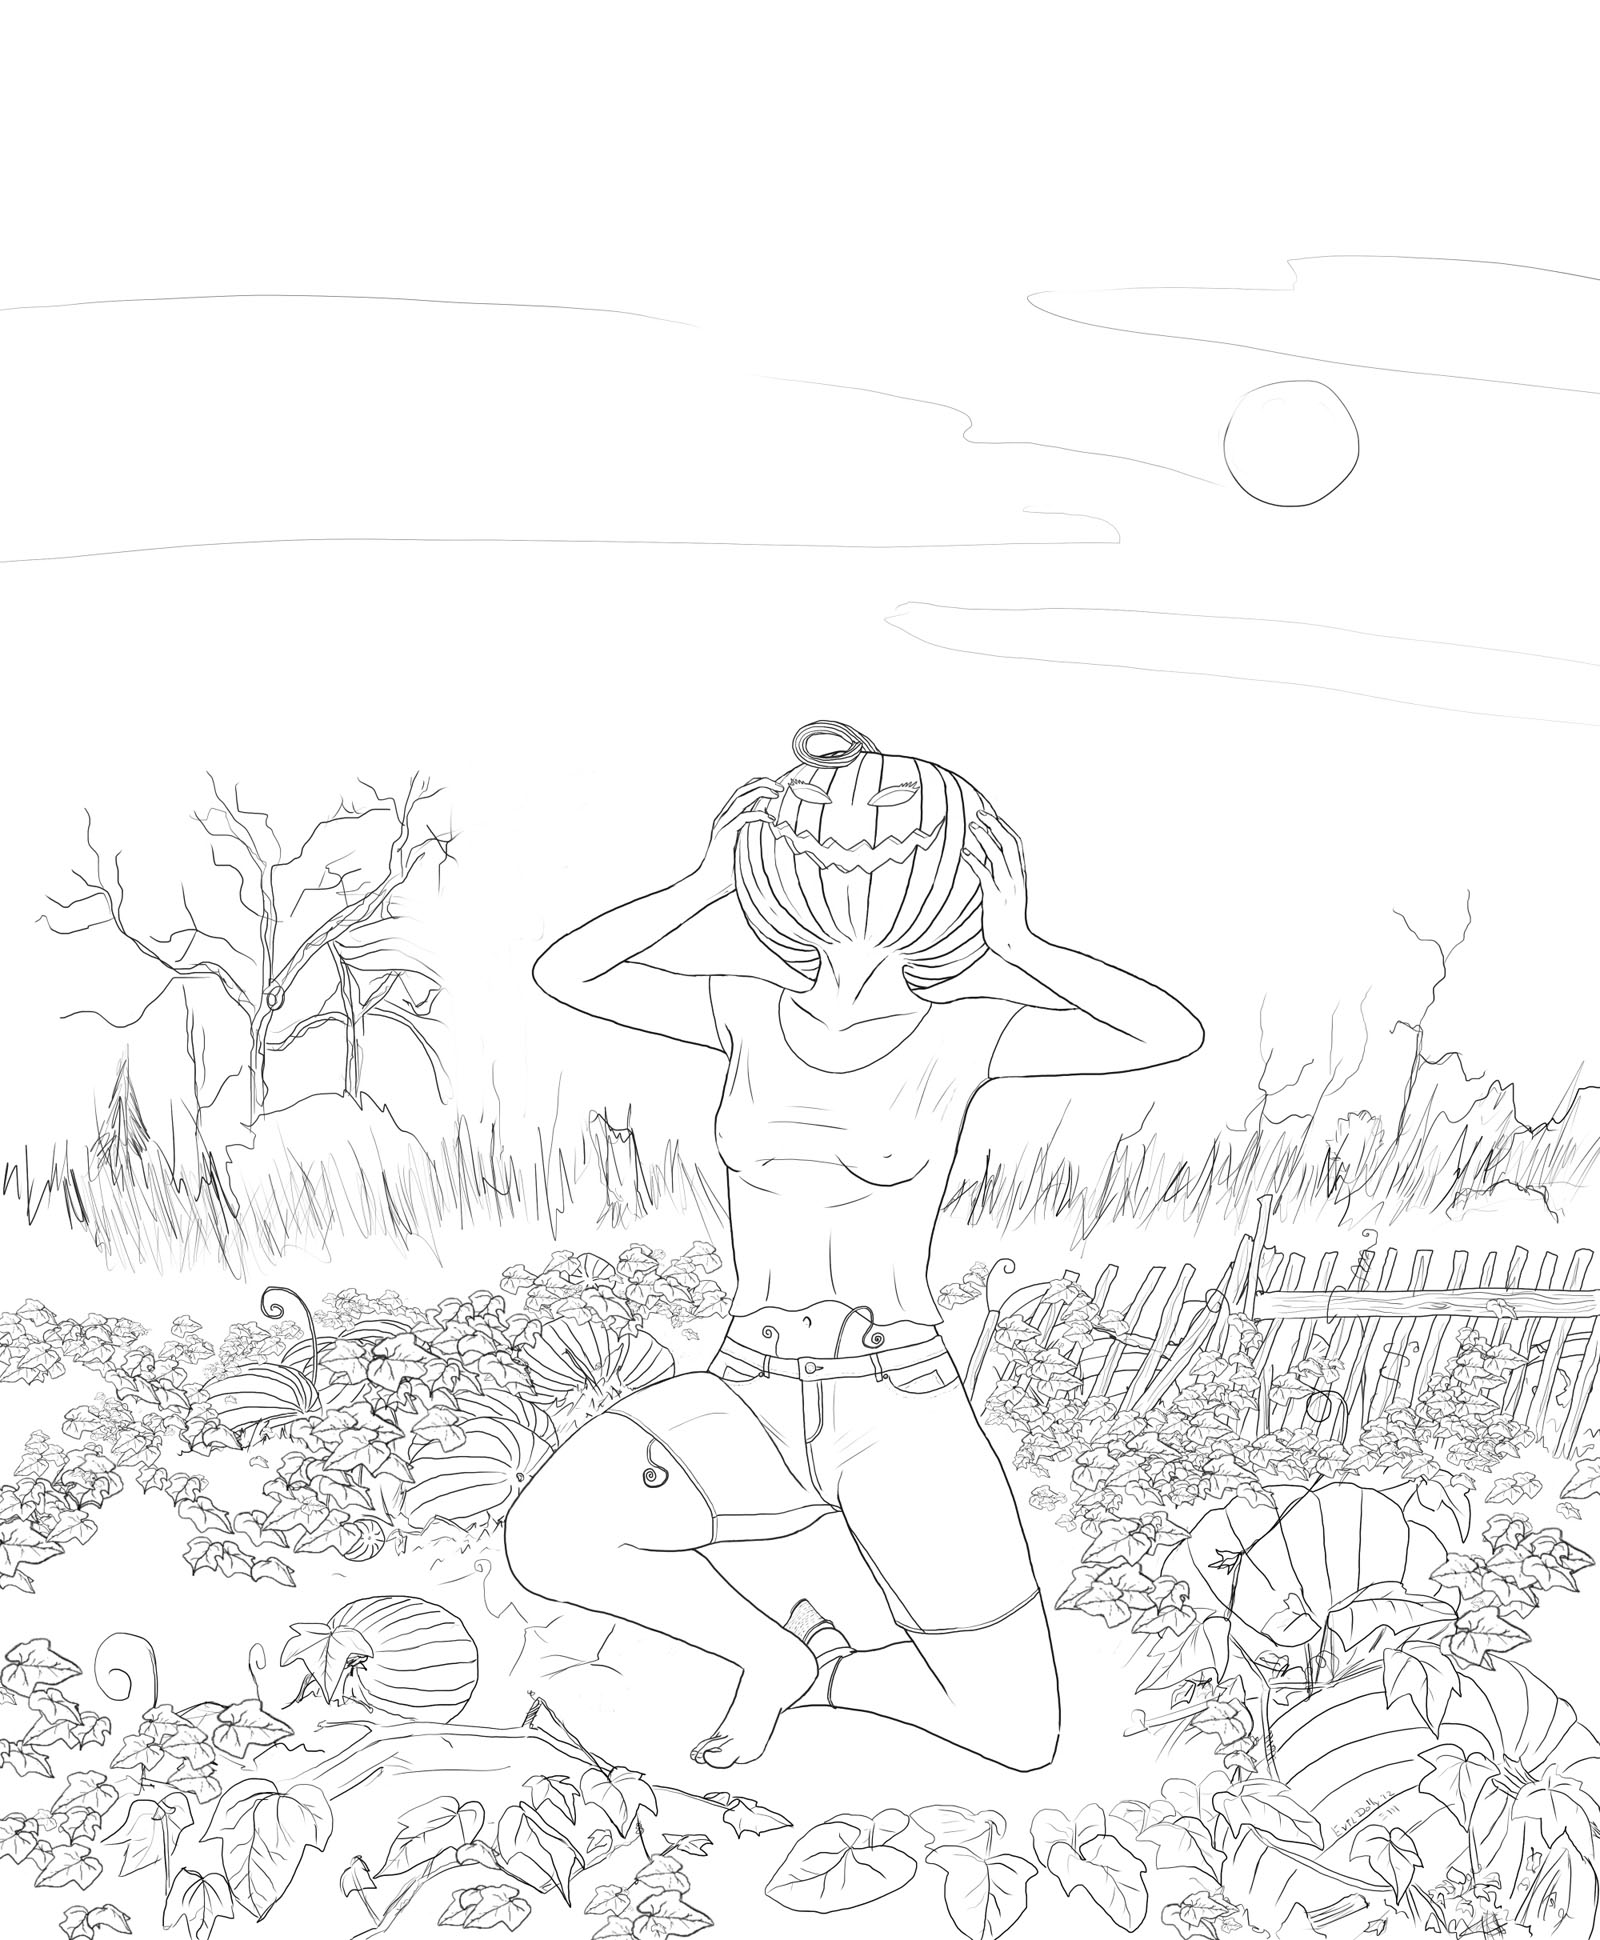 Transformation. Drawing of a woman staggering through an abandoned pumpkin patch. She's wearing a revealing top and jean shorts. She's clutching her head which has turned into a smiling, feminine jack-o-lantern. Tendrils of pumpkin vines are emerging from beneath her shorts.